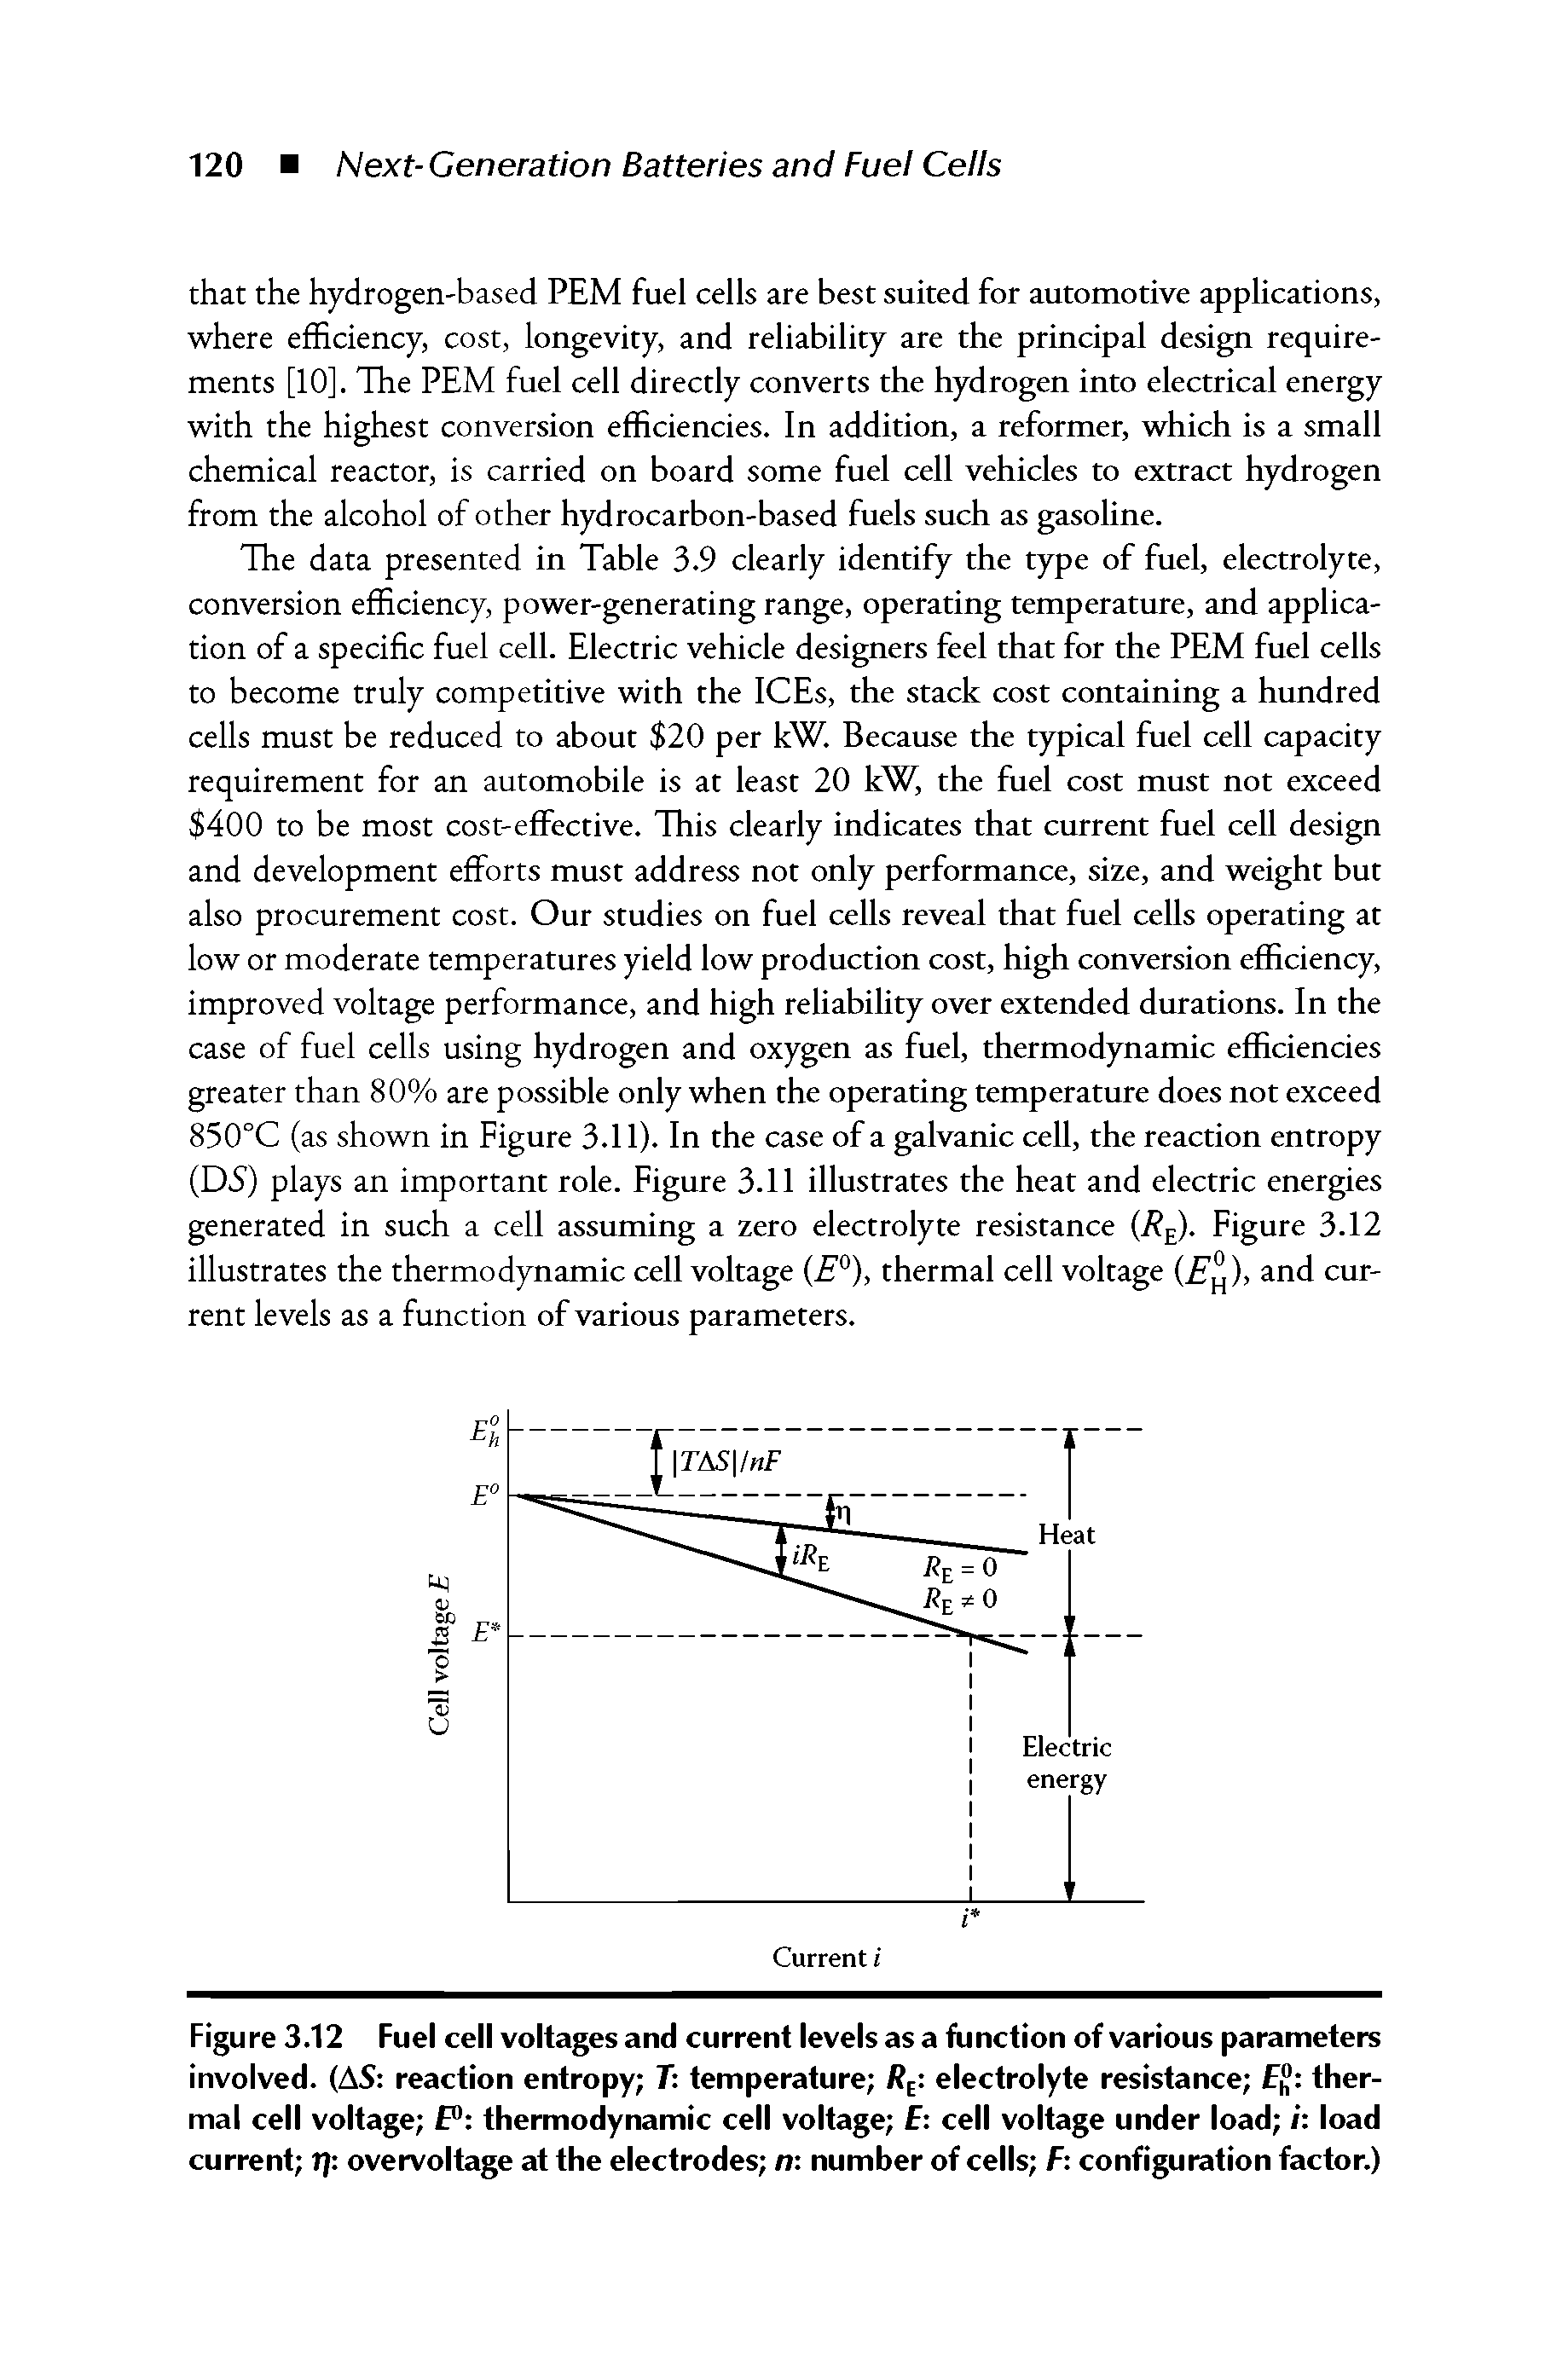 Figure 3.12 Fuel cell voltages and current levels as a function of various parameters involved. (AS reaction entropy T temperature electrolyte resistance ff- thermal cell voltage P thermodynamic cell voltage f cell voltage under load i load current tj overvoltage at the electrodes n number of cells f configuration factor.)...